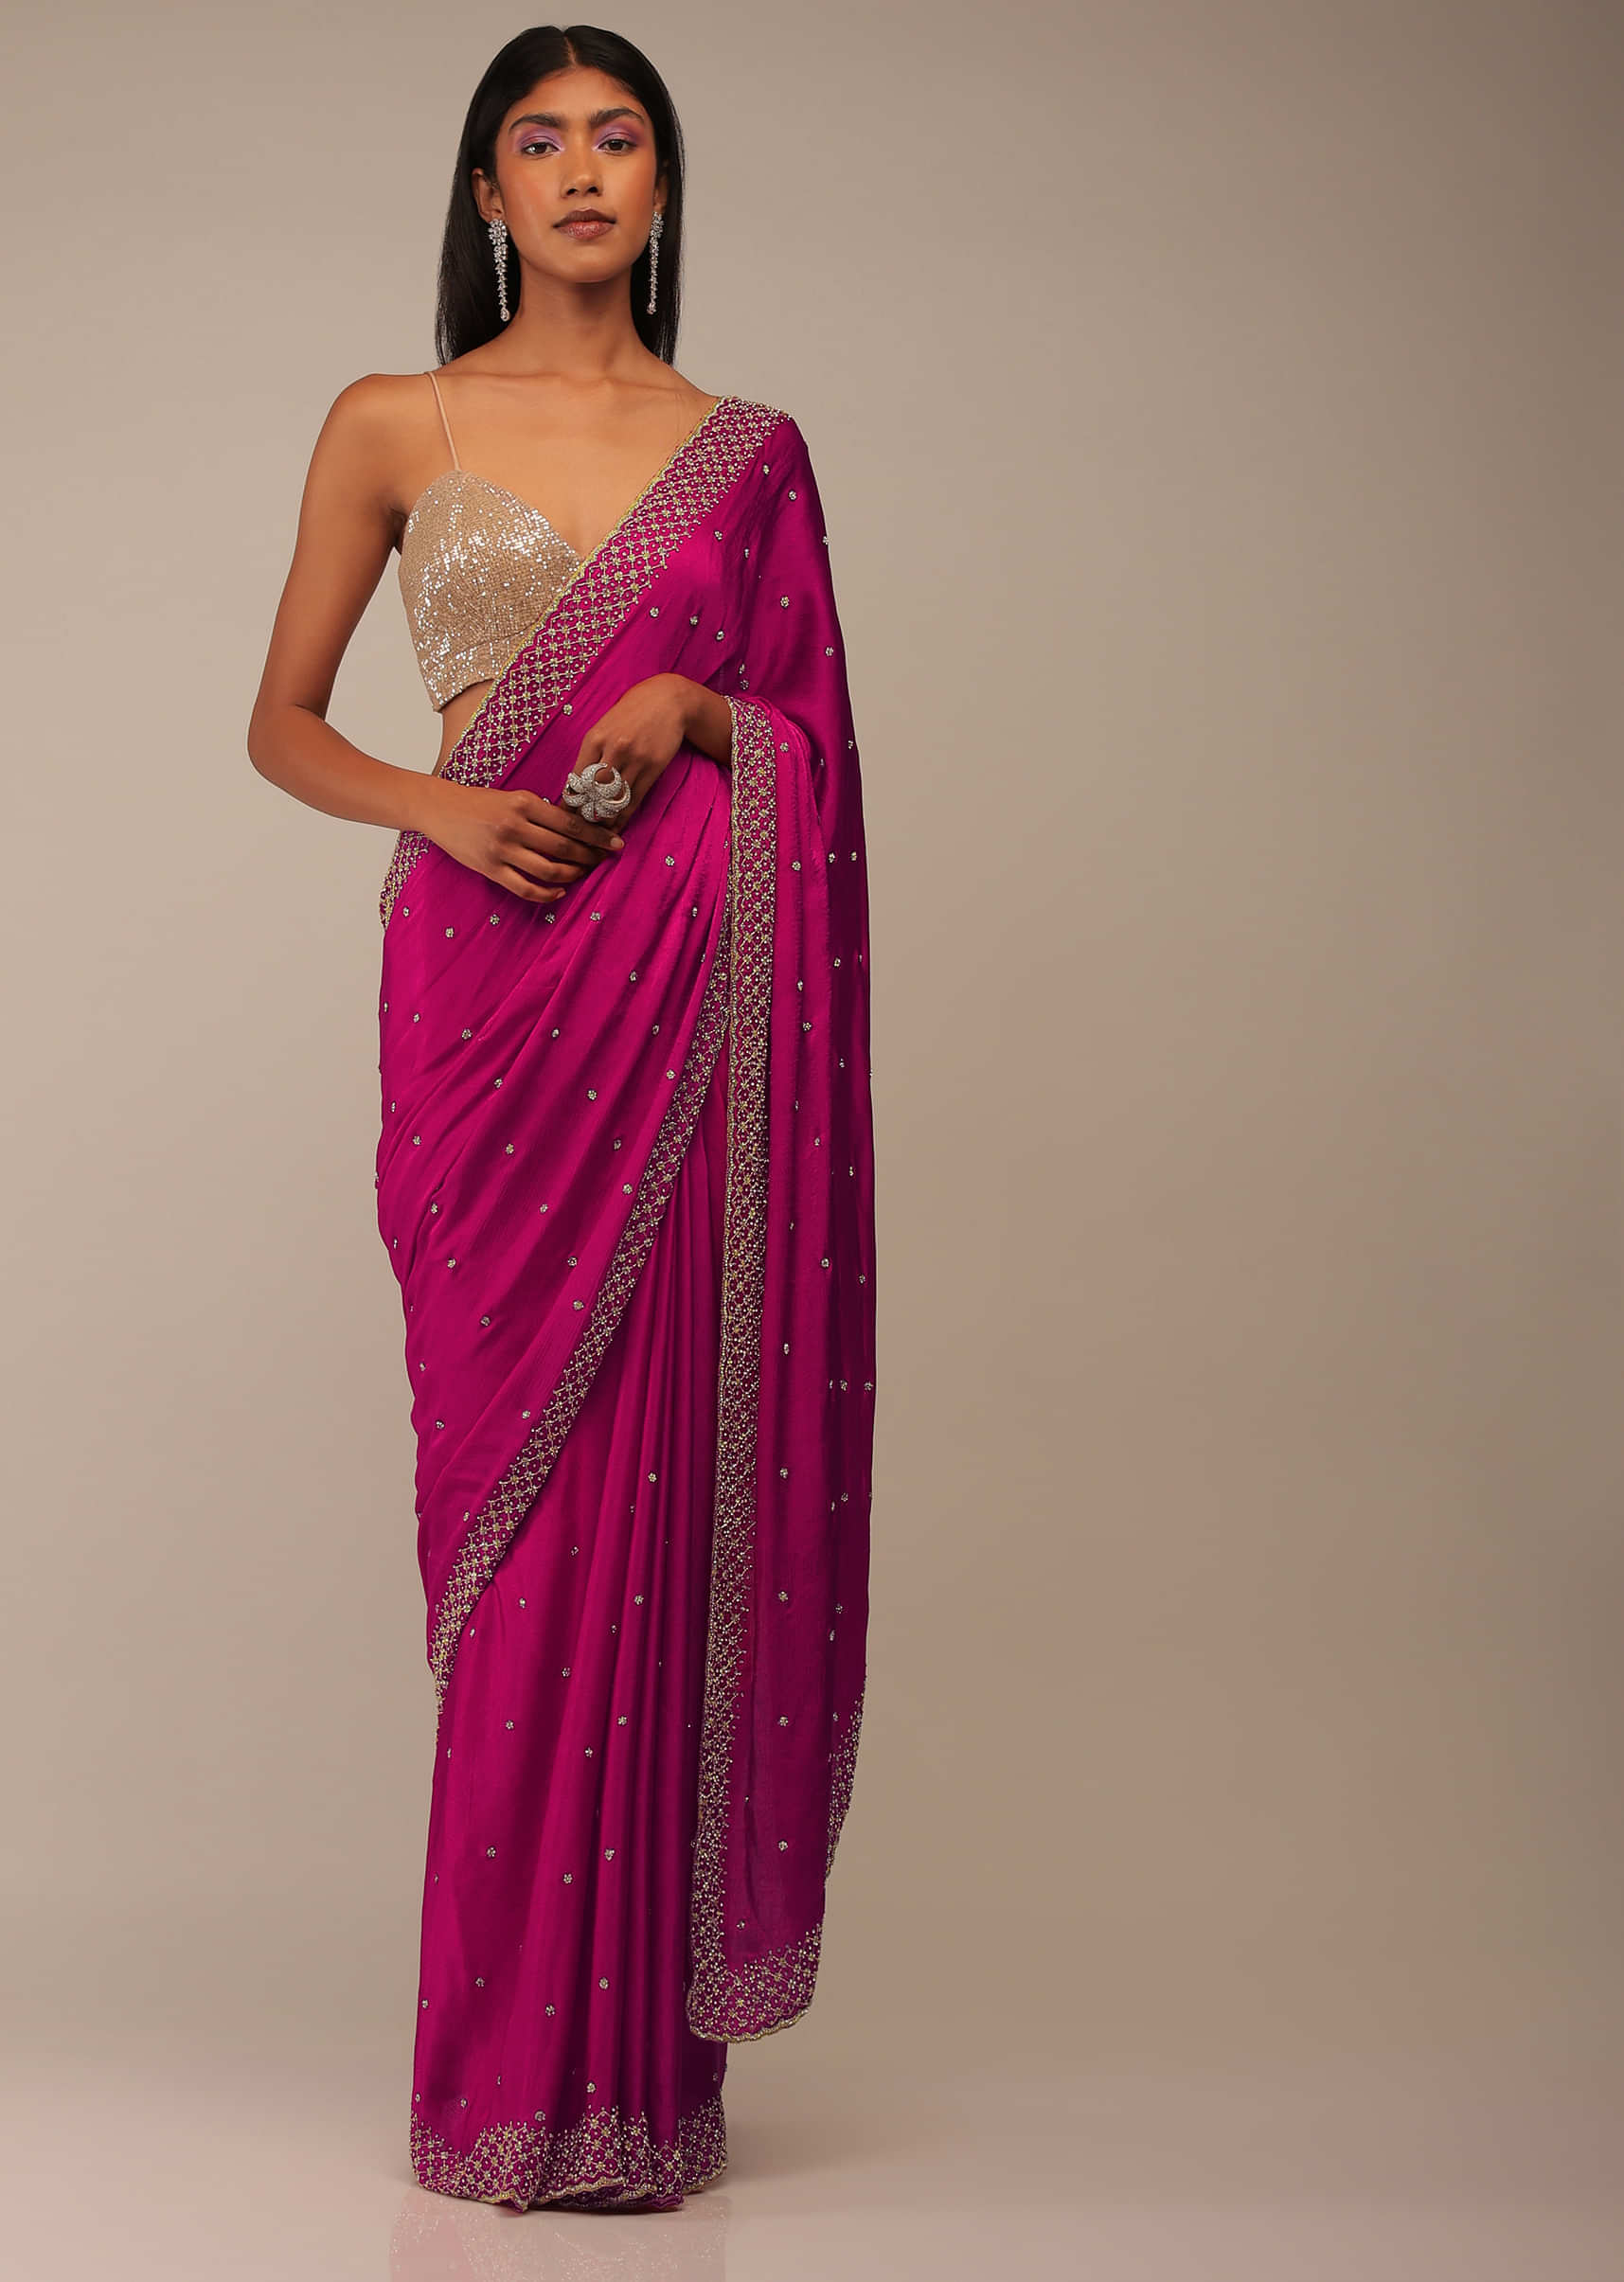 Buy Latest Party Wear Chiffon Saree Online In India | Me99-pokeht.vn